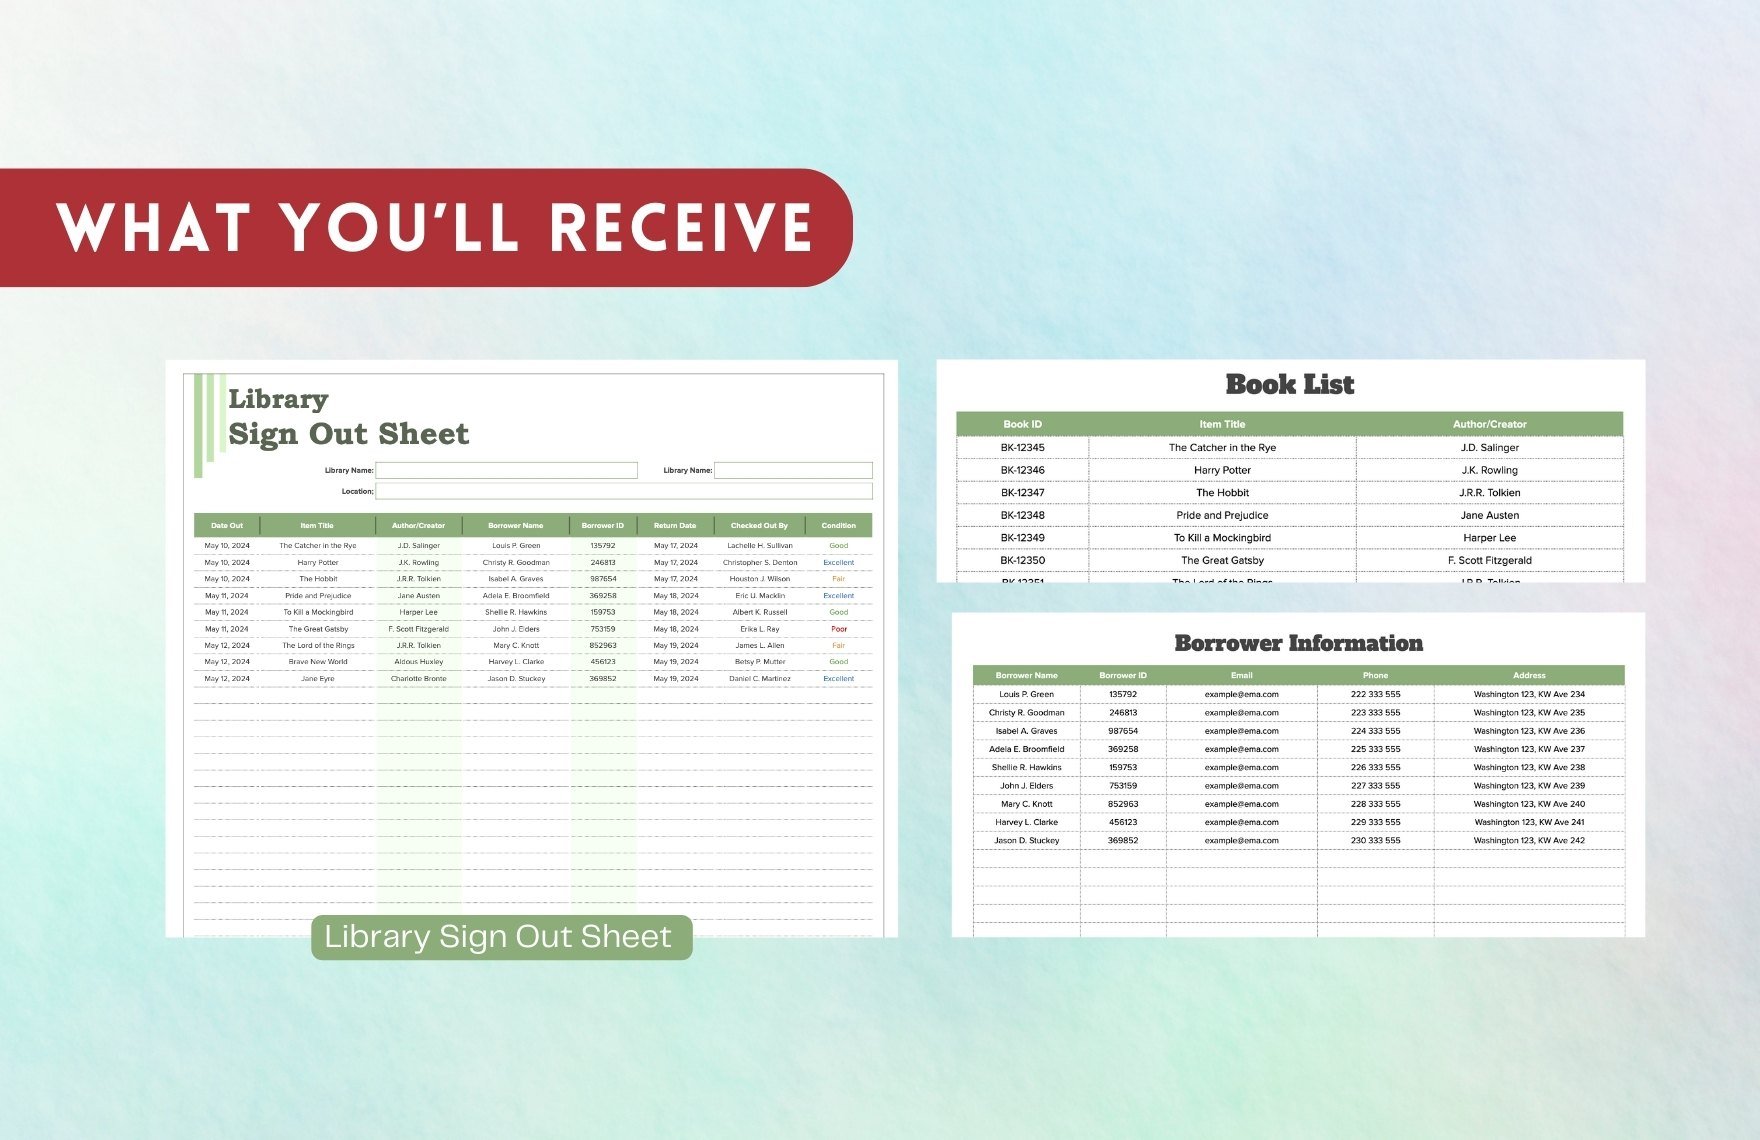 Library Sign Out Sheet Template